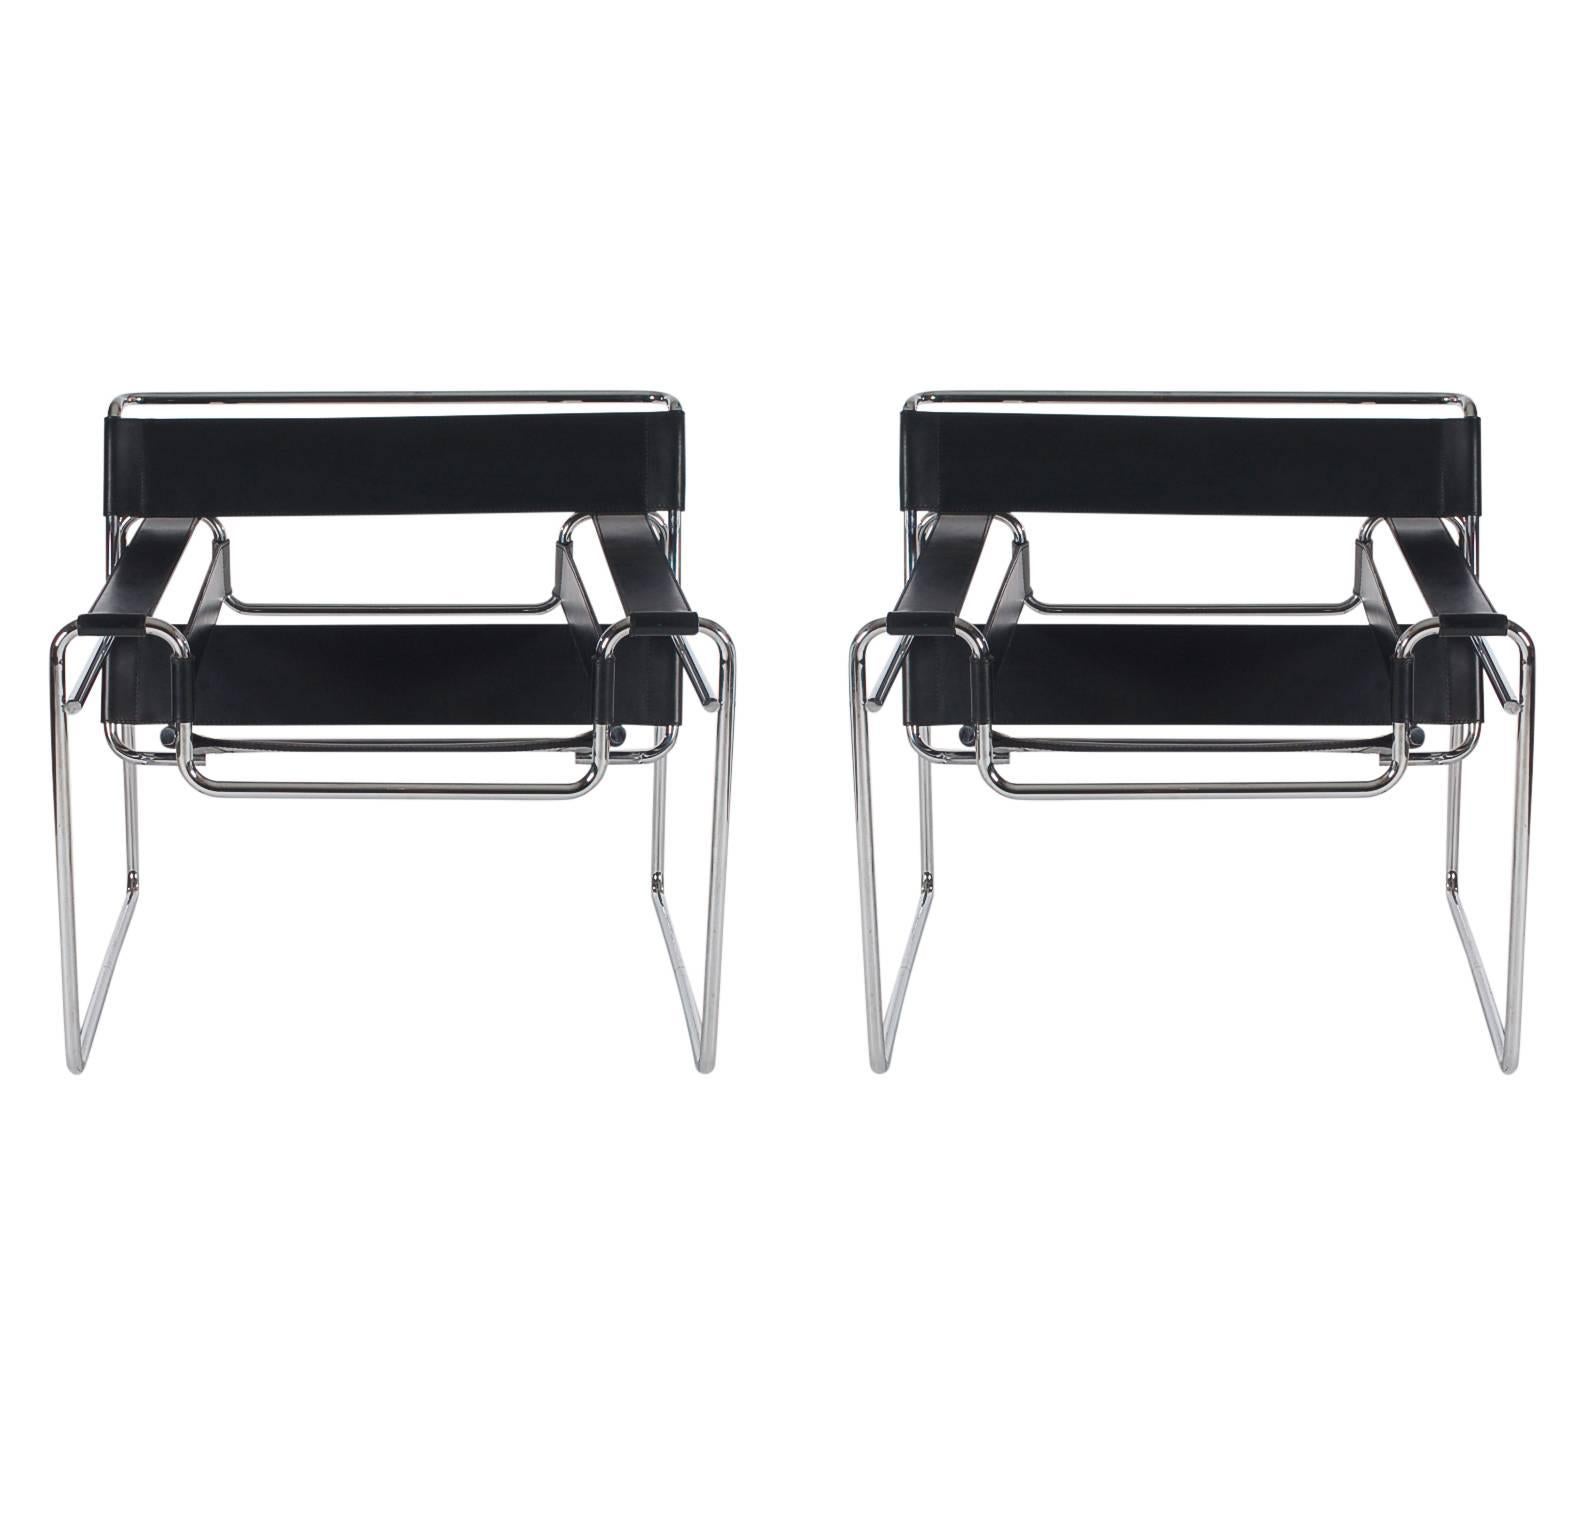 Authentic pair of Wassily chairs designed by Marcel Breuer and produced in Italy for Knoll. Well made sturdy chrome chair frames with thick black leather. These are licensed chairs signed by Knoll.